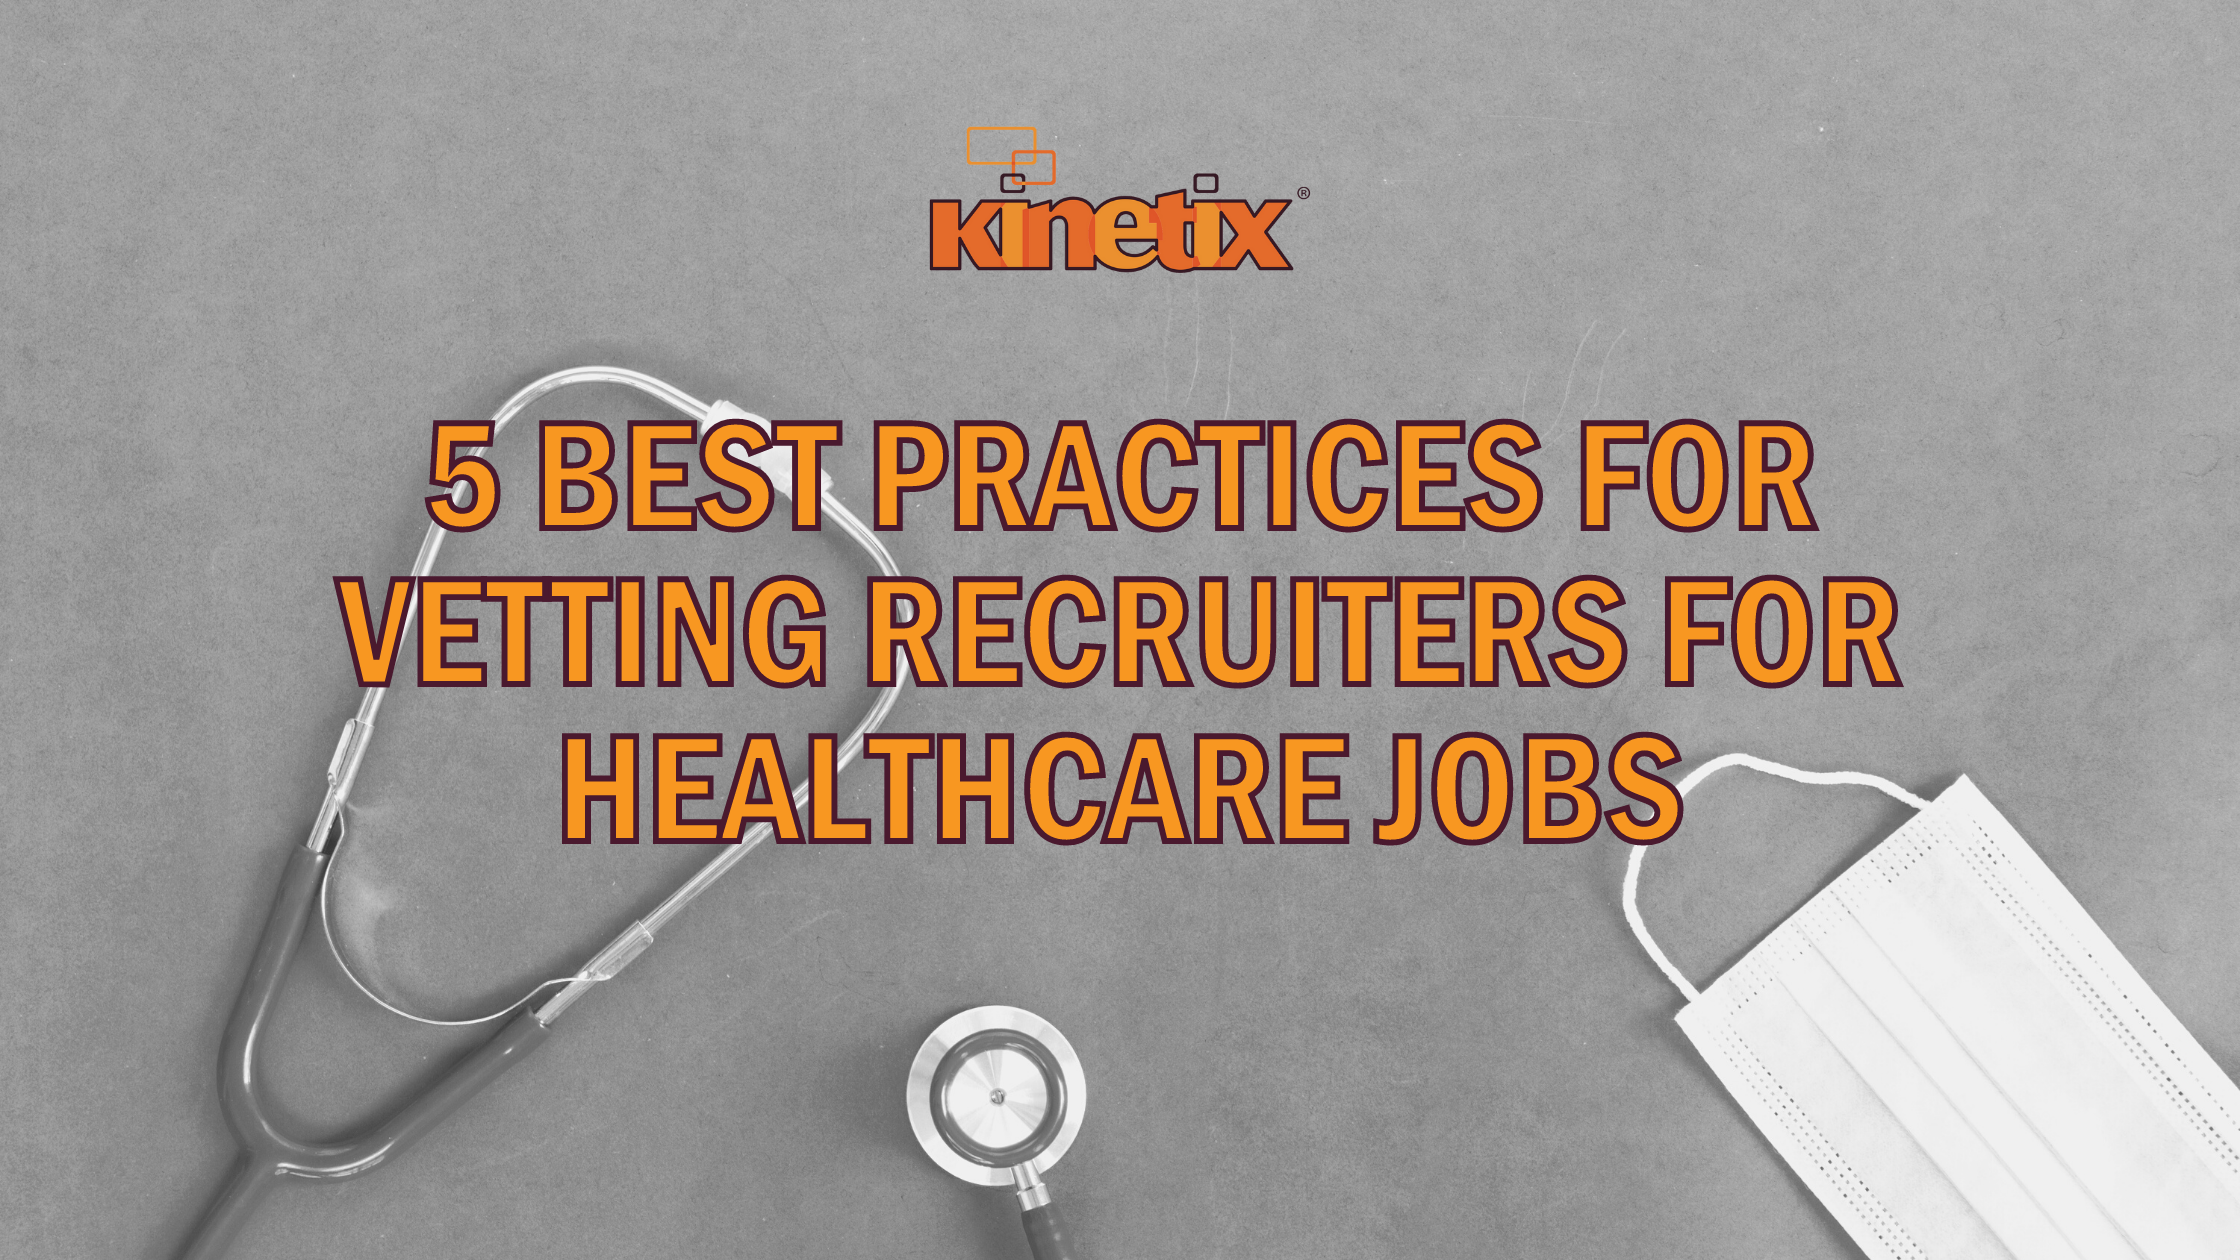 Expertise Matters: How to Choose Recruiters for Healthcare Jobs